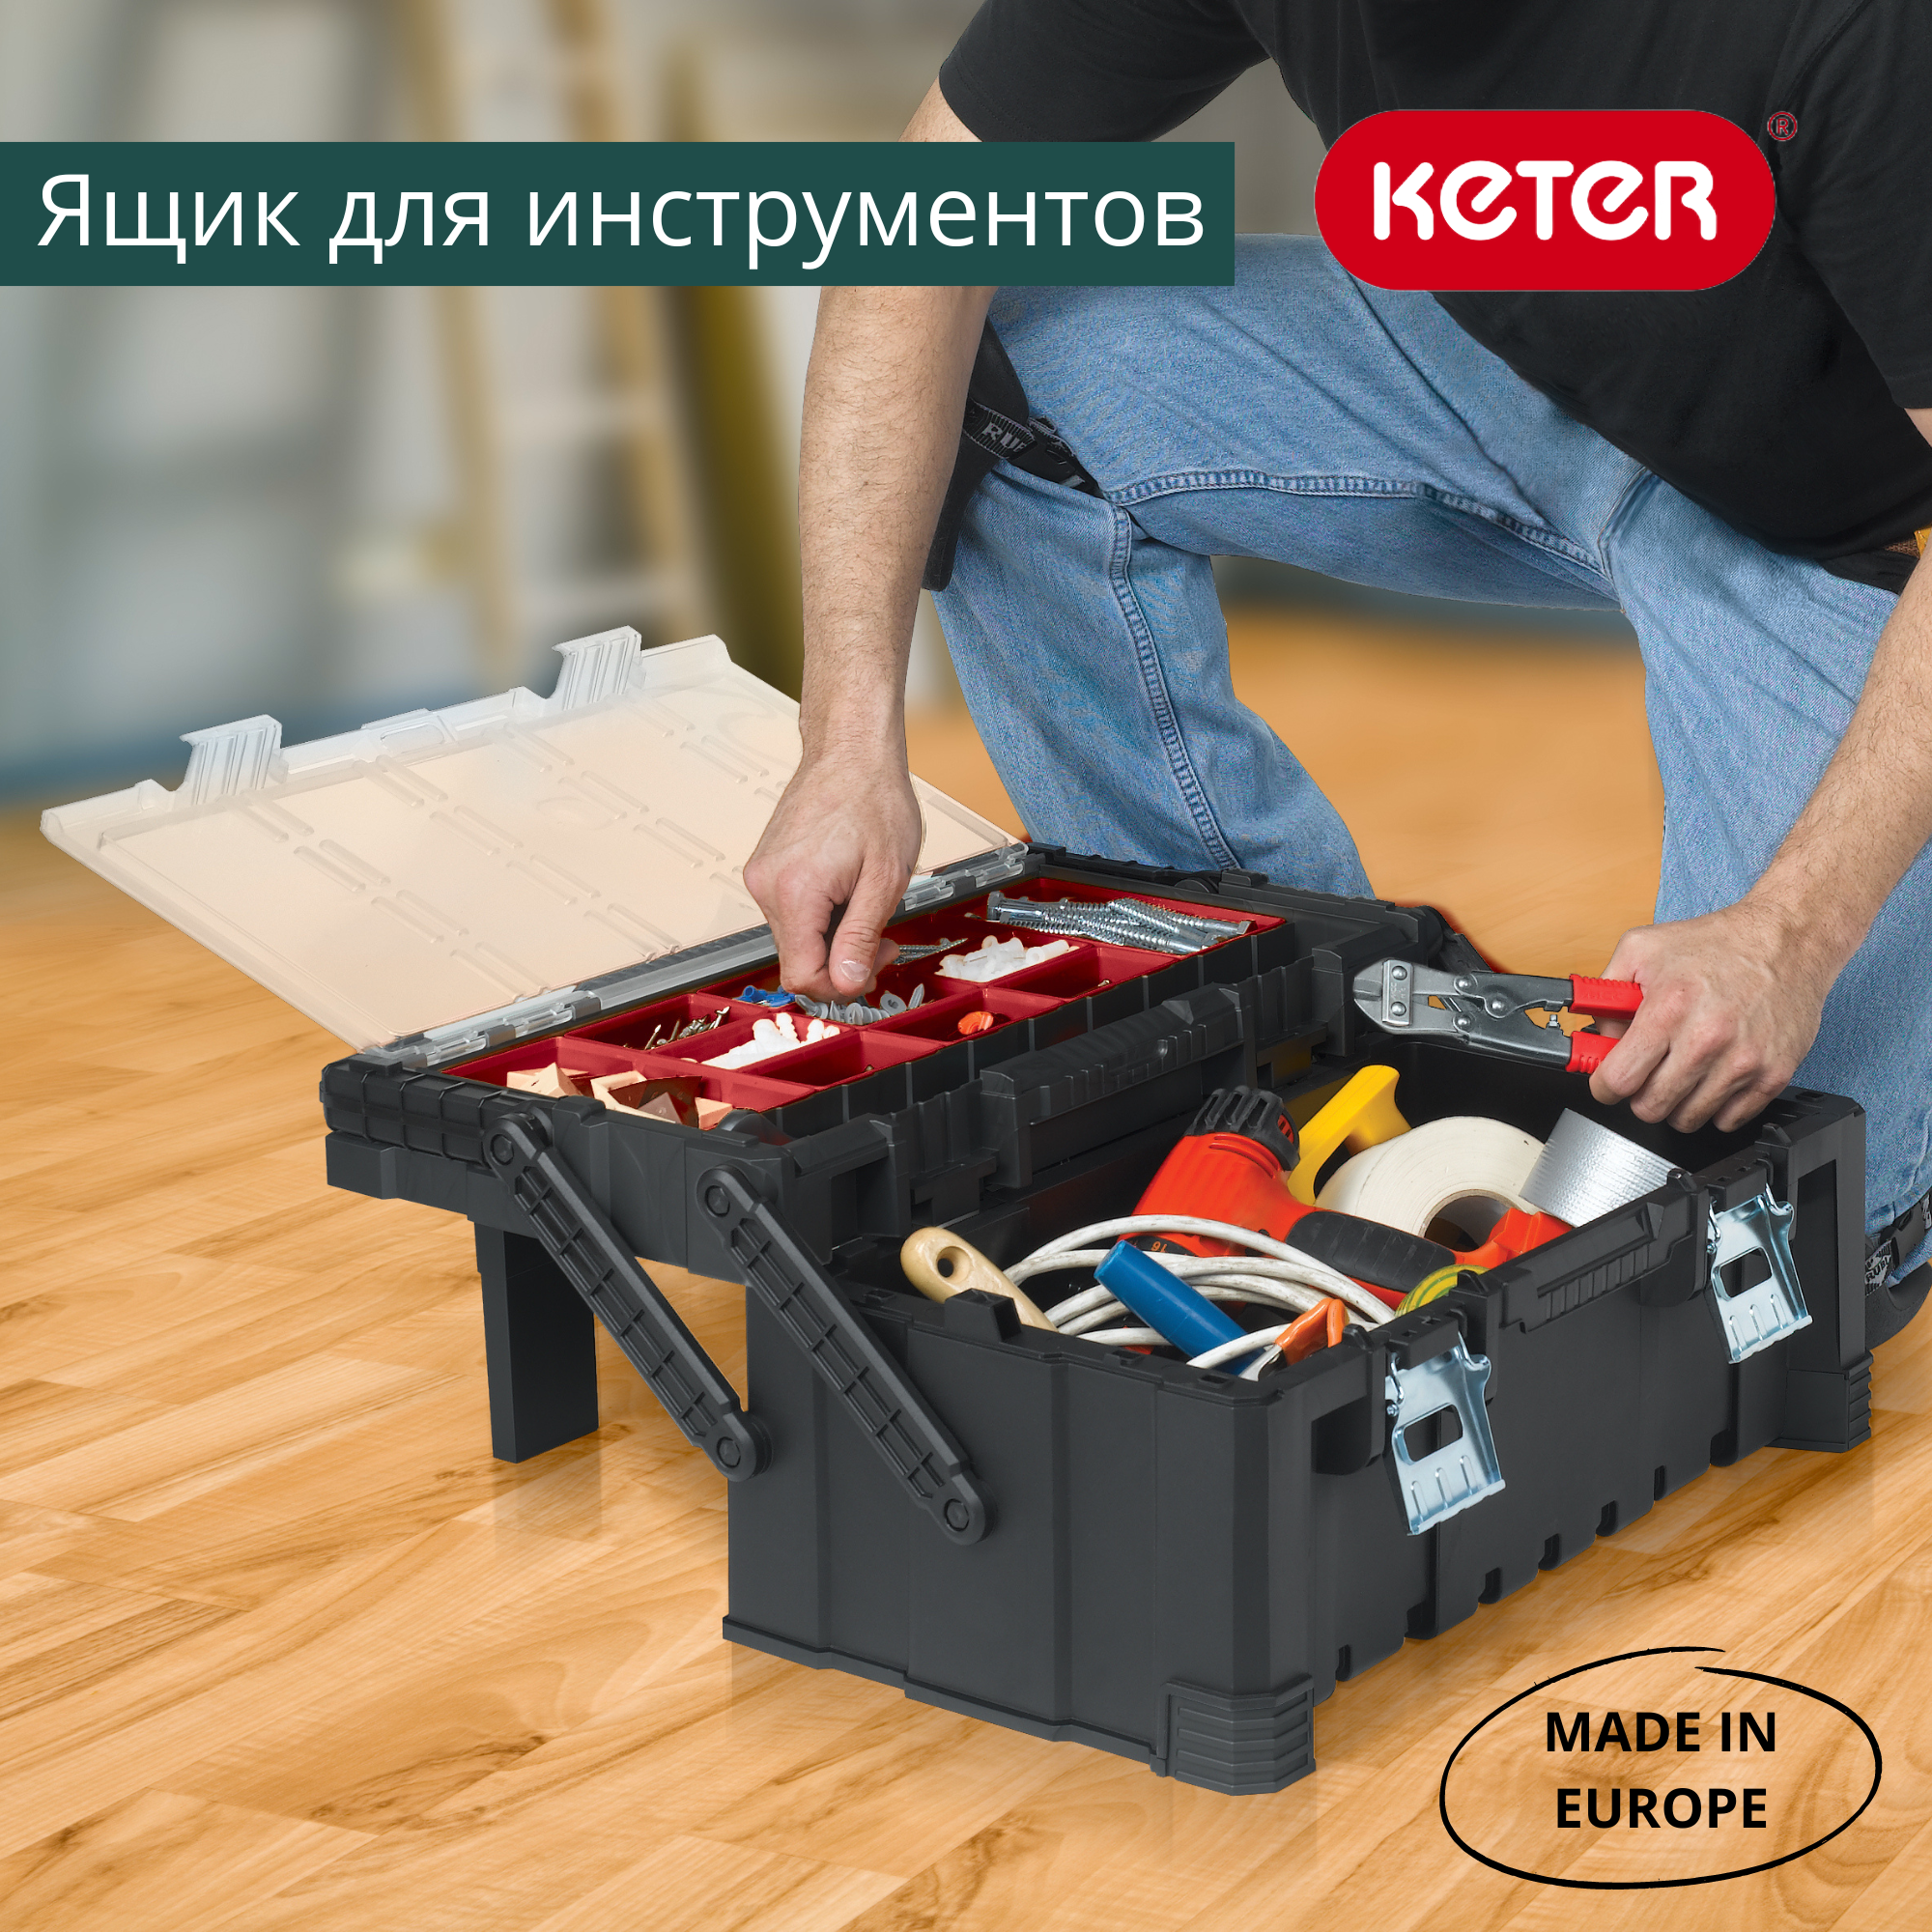 Keter tools